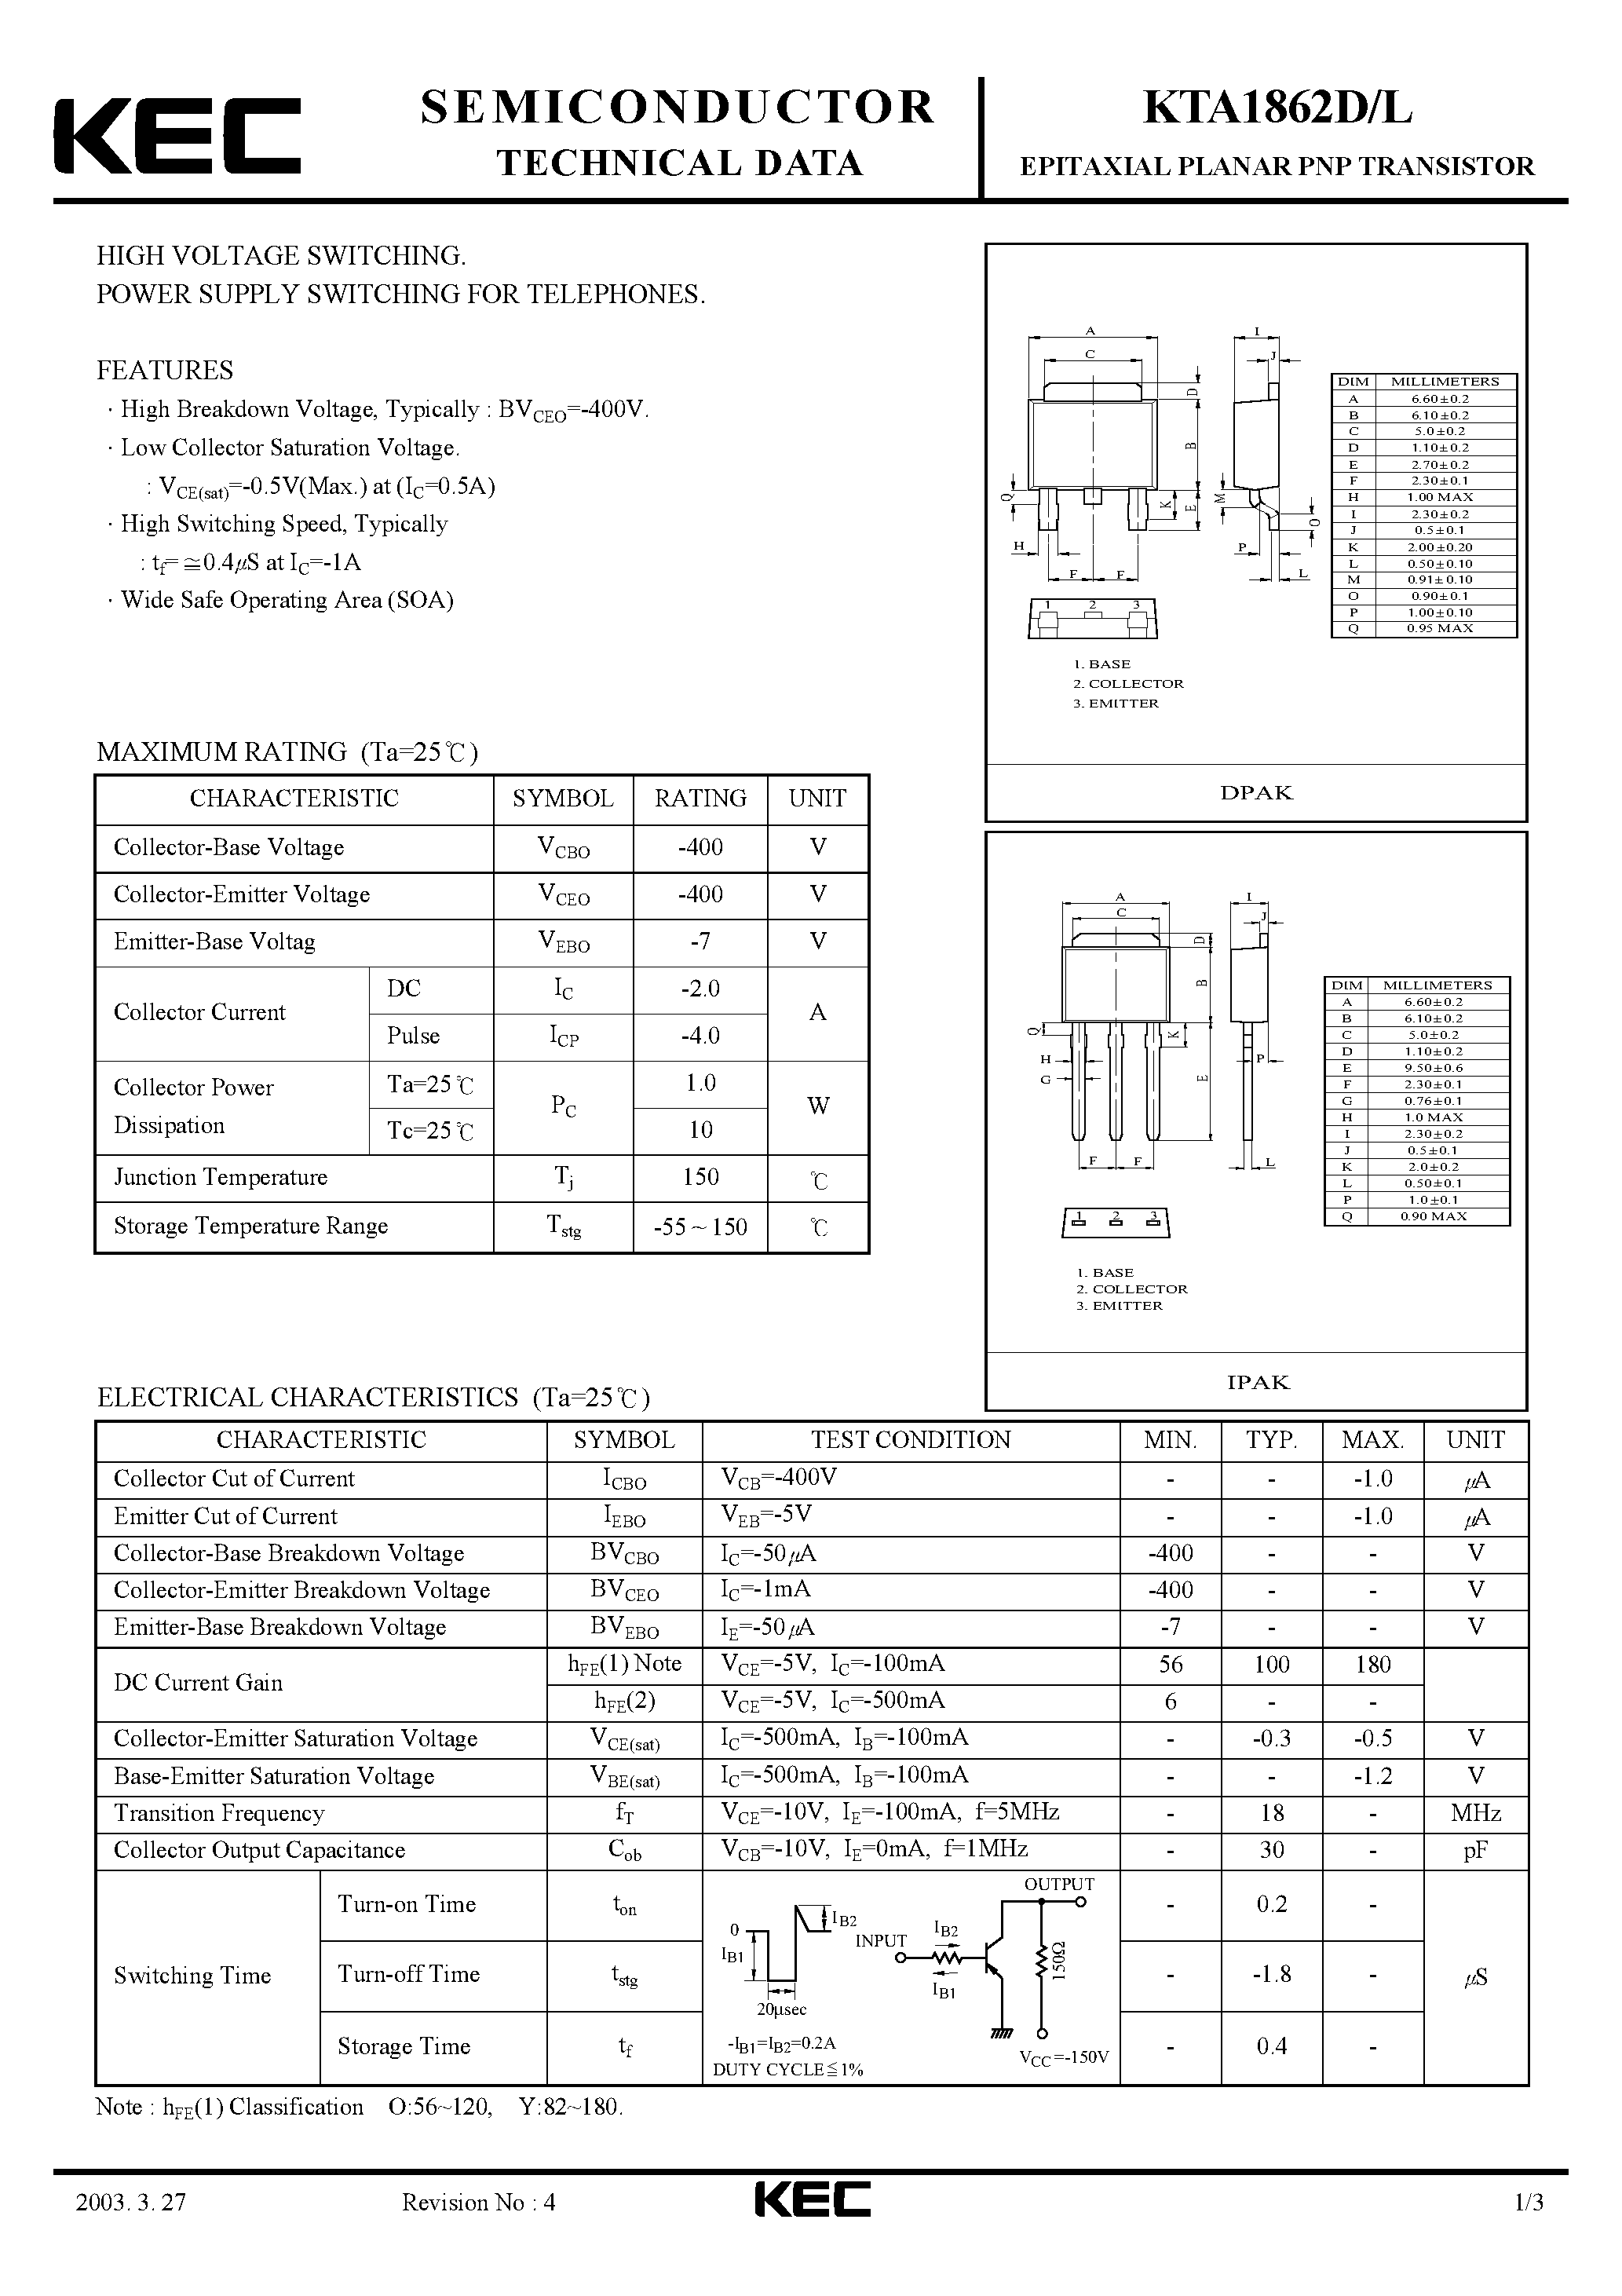 Datasheet KTA1862L - EPITAXIAL PLANAR PNP TRANSISTOR (HIGH VOLTAGE SWITCHING POWER SUPPLY SWITCHING FOR TELEPHONES) page 1